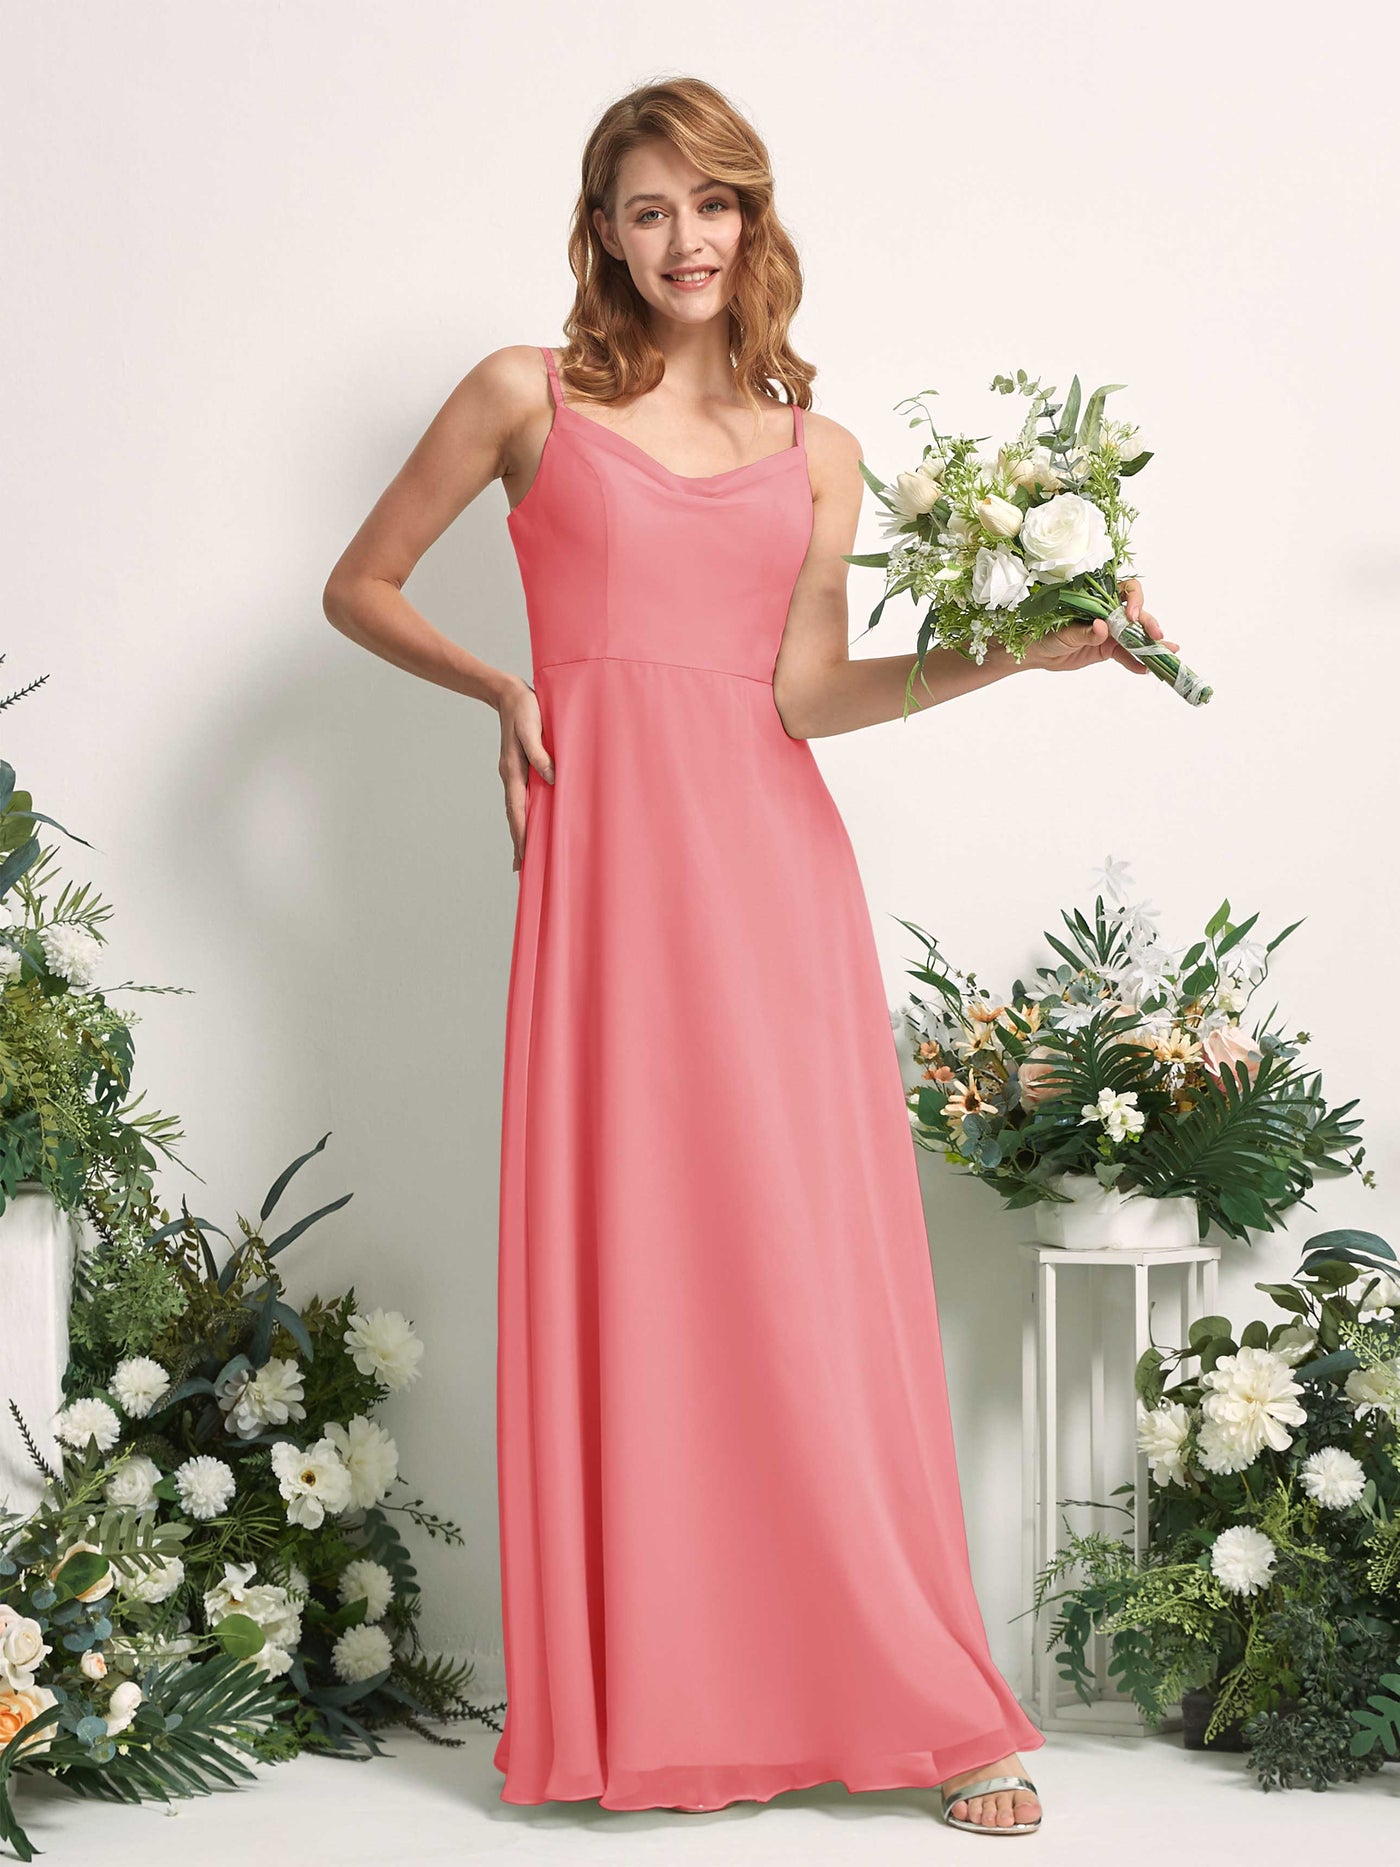 Bridesmaid Dress A-line Chiffon Spaghetti-straps Full Length Sleeveless Wedding Party Dress - Coral Pink (81227230)#color_coral-pink